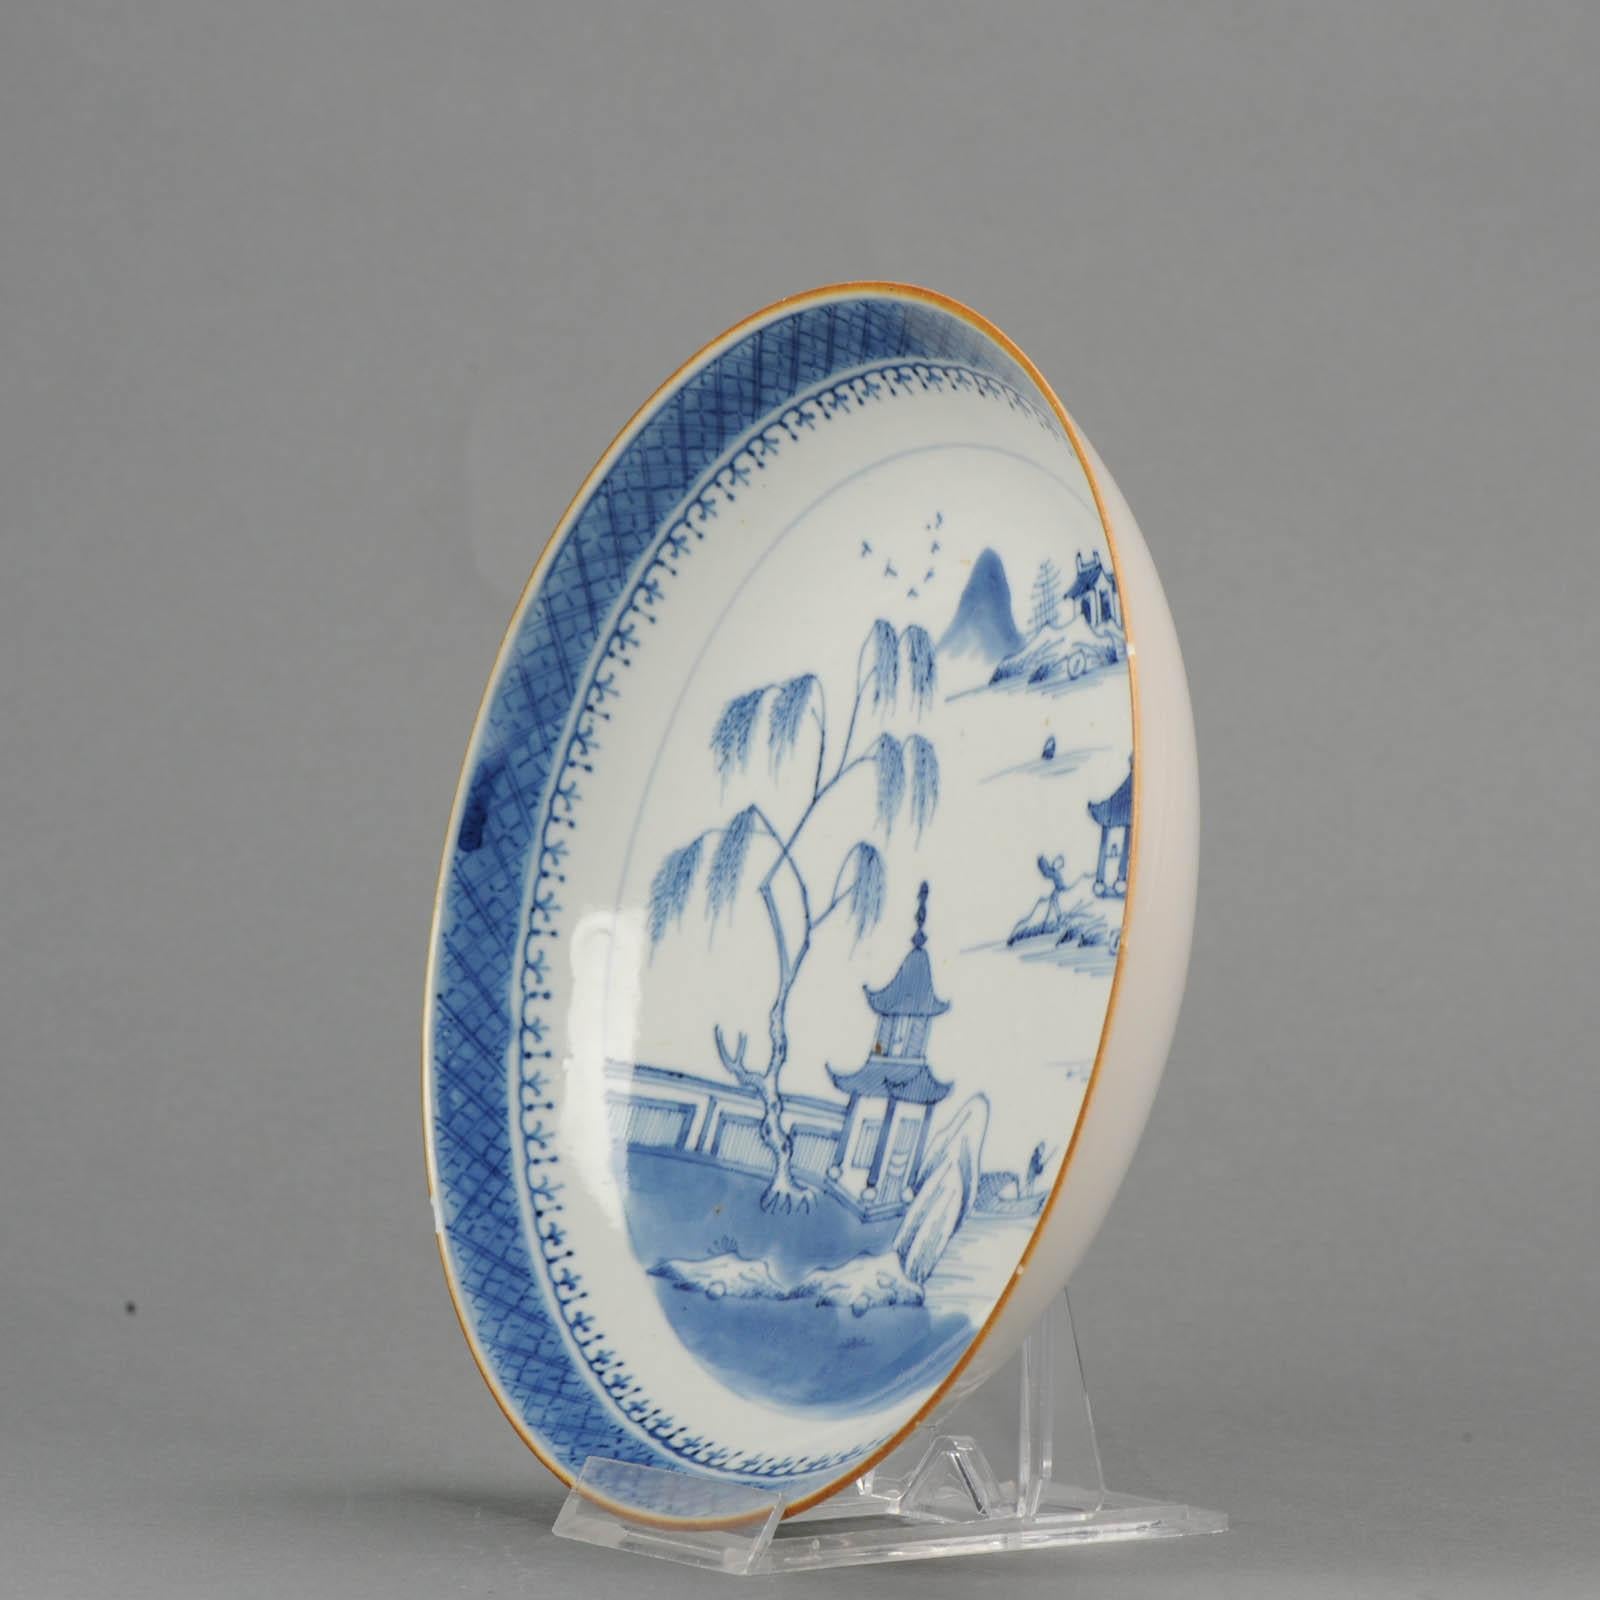 A very nicely decorated plate in Blue and white. Atypical decoration.

Additional information:
Material: Porcelain & Pottery
Type: Plates
Region of Origin: China
Country of Manufacturing: China
Period: 18th century Qing (1661 - 1912)
Age: